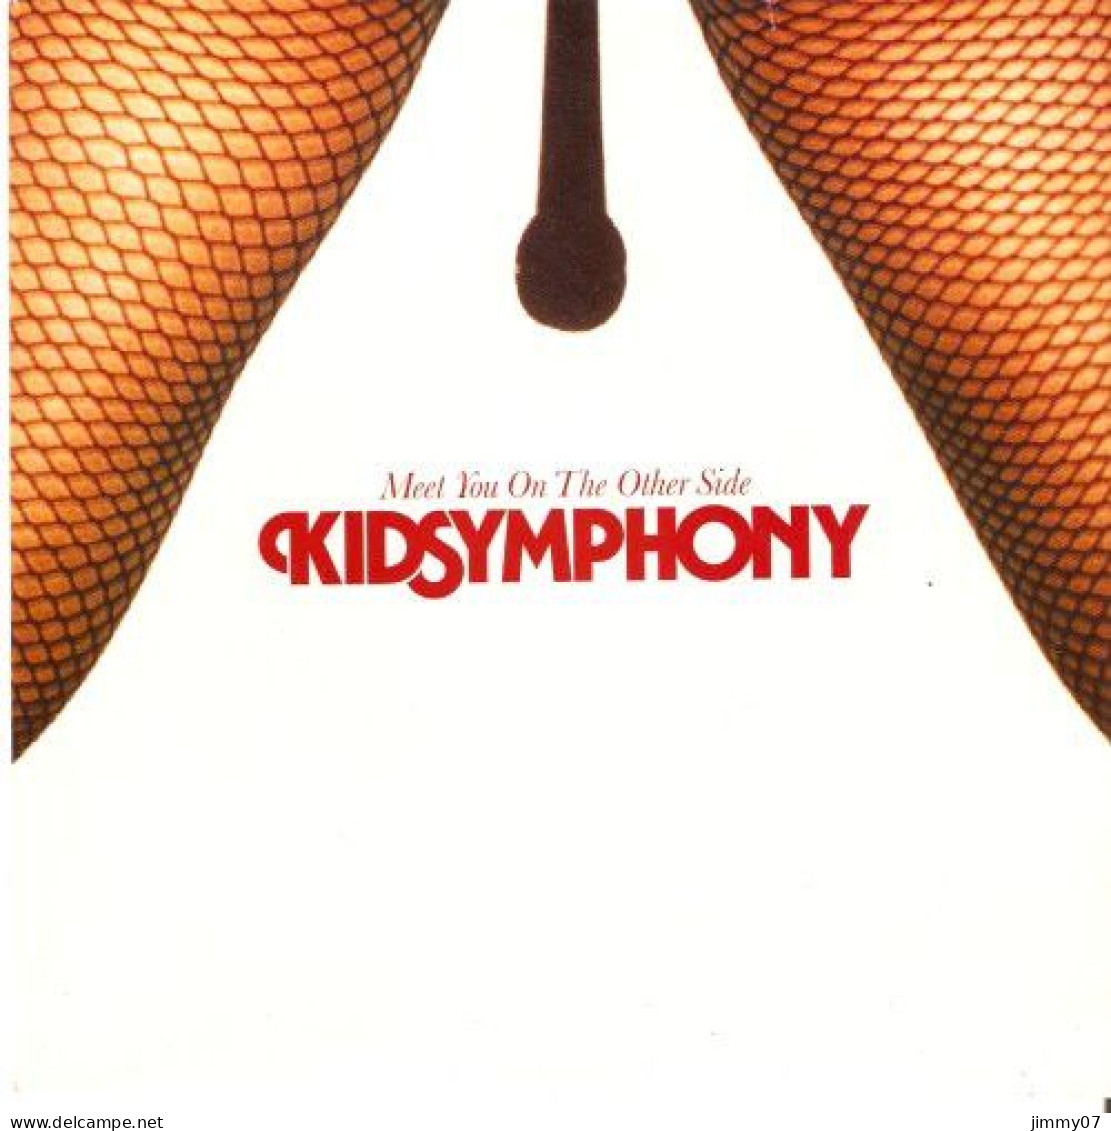 Kid Symphony - Meet You On The Other Side (7", Single, Whi) - Rock